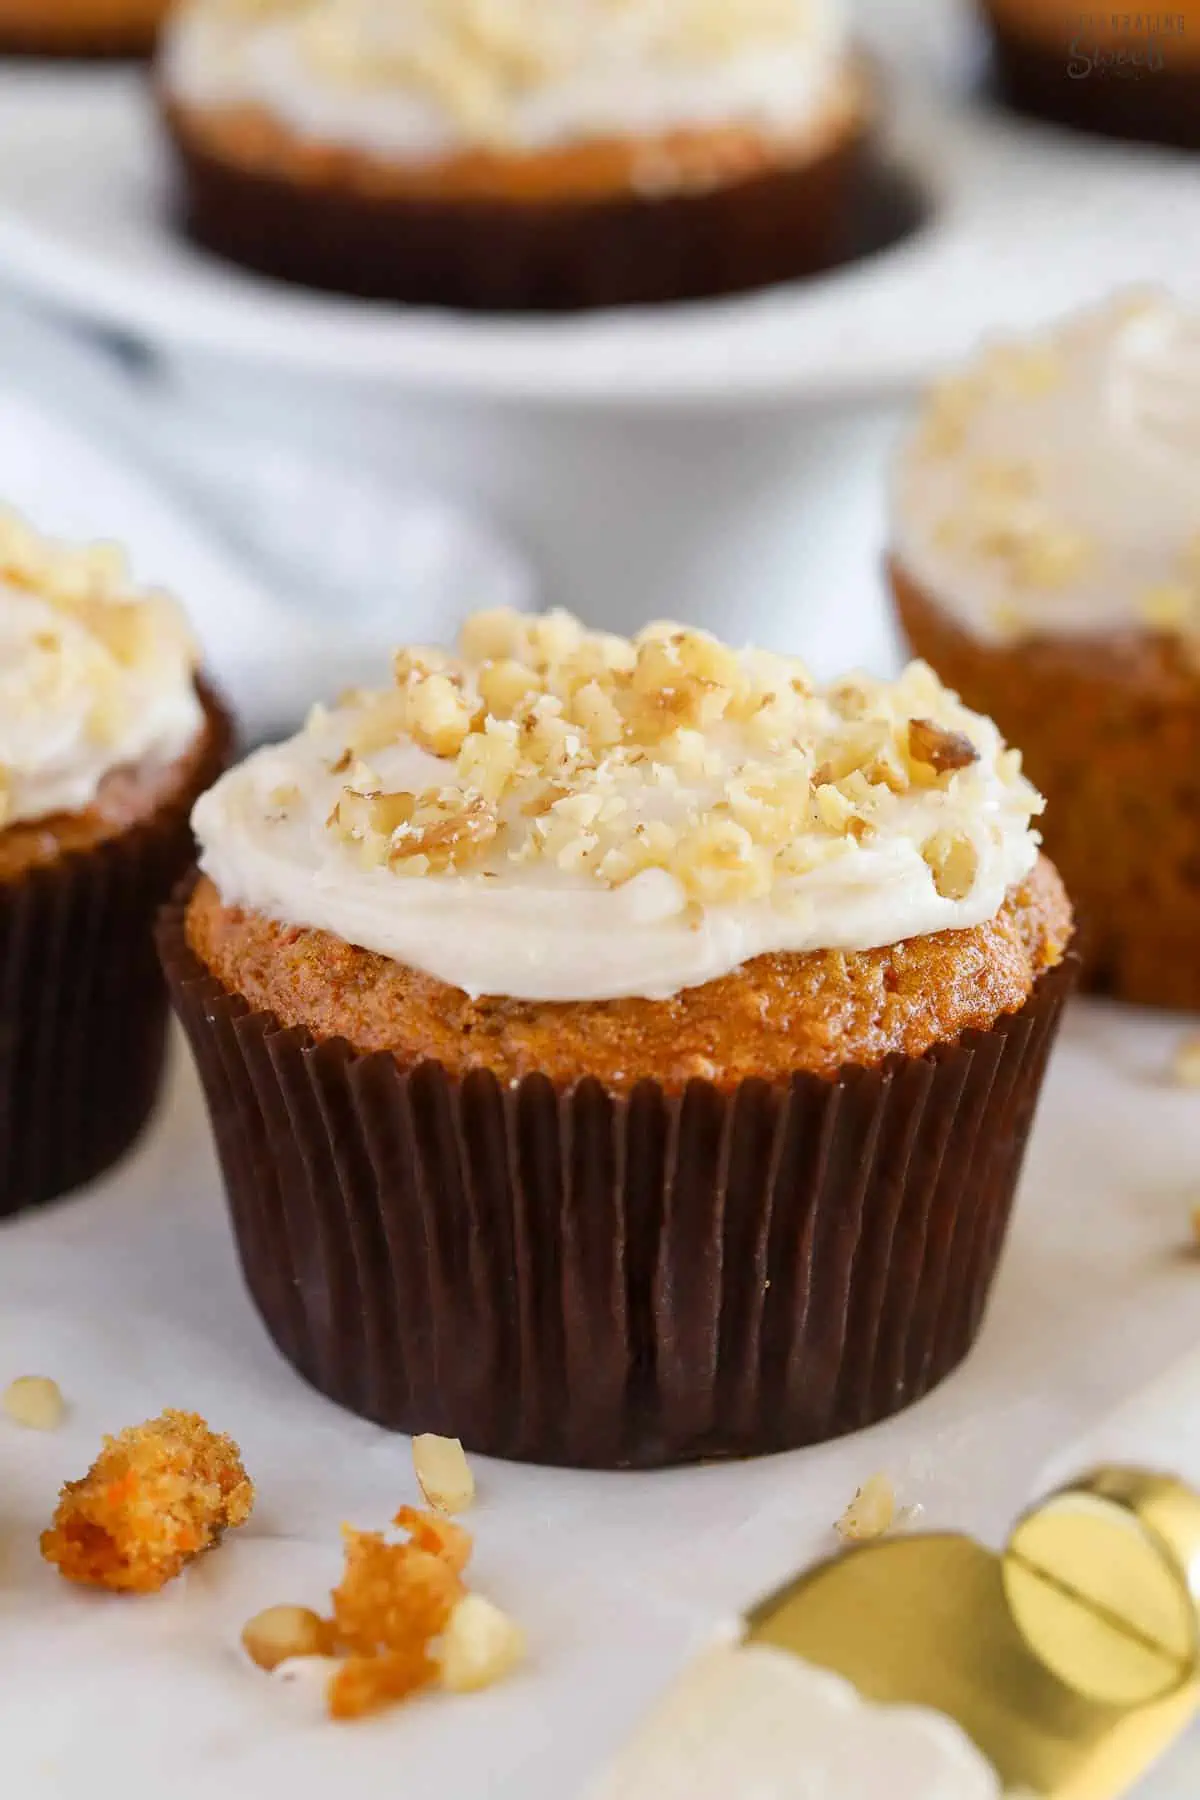 Carrot muffin topped with frosting and chopped walnuts.